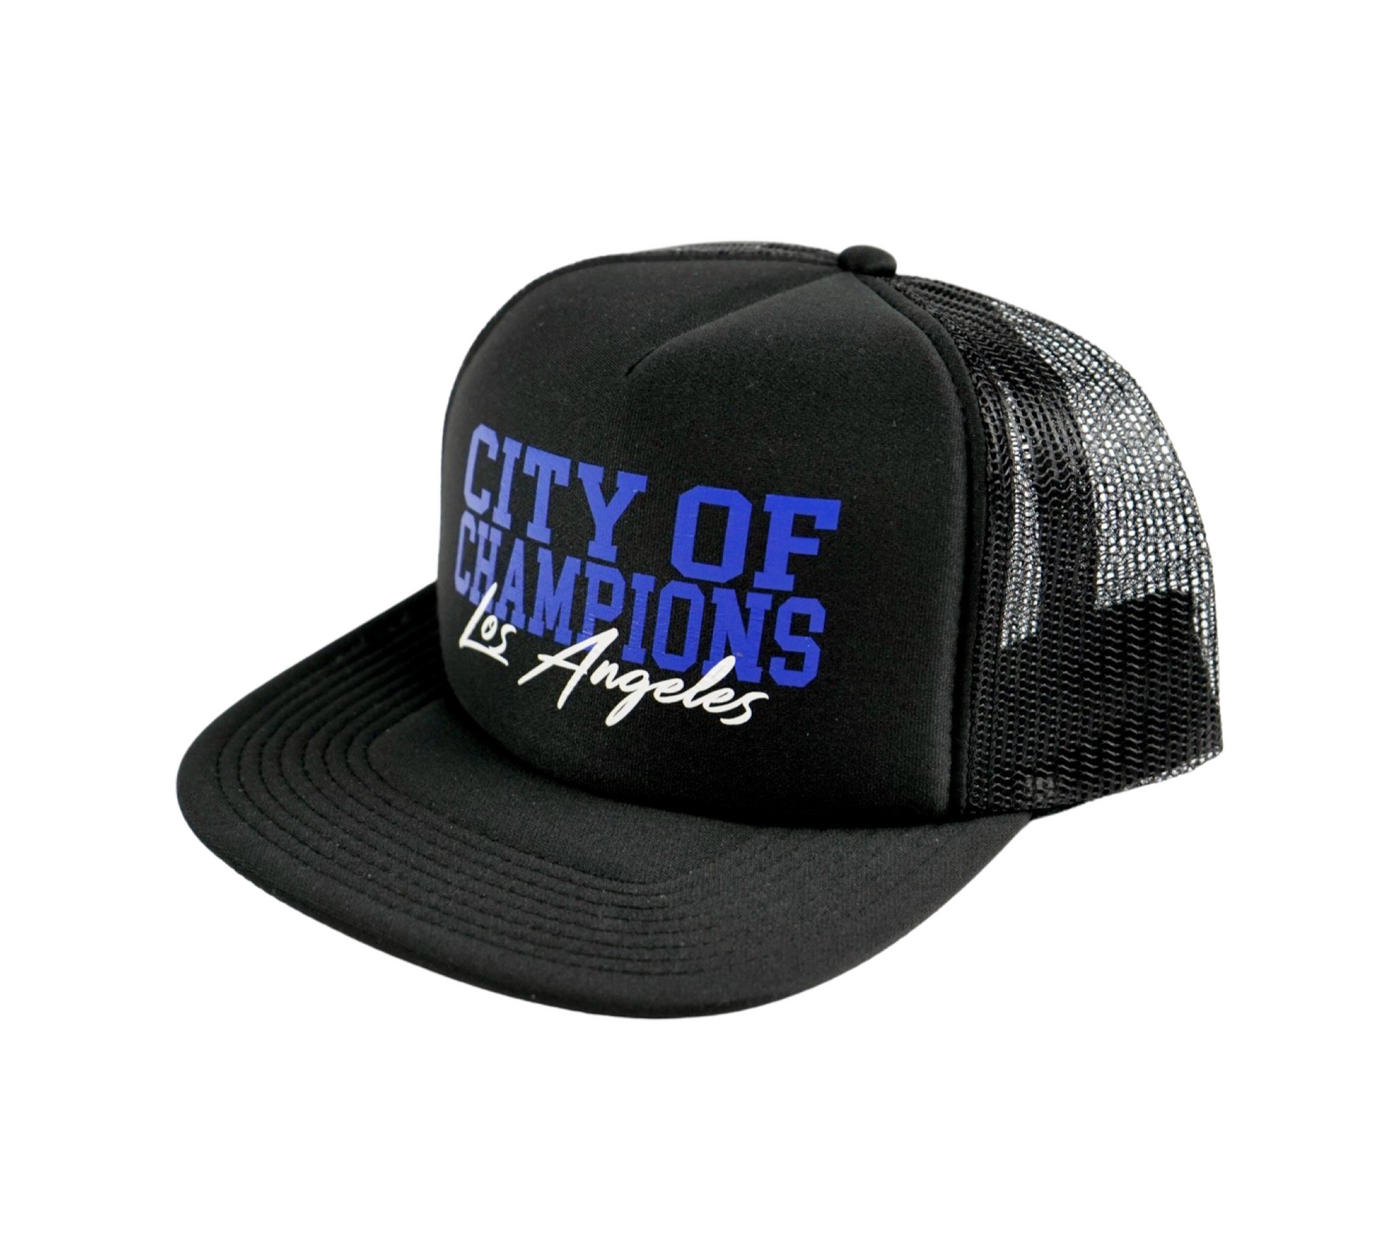 Trucker Hat - City of Champions Royal Blue and White